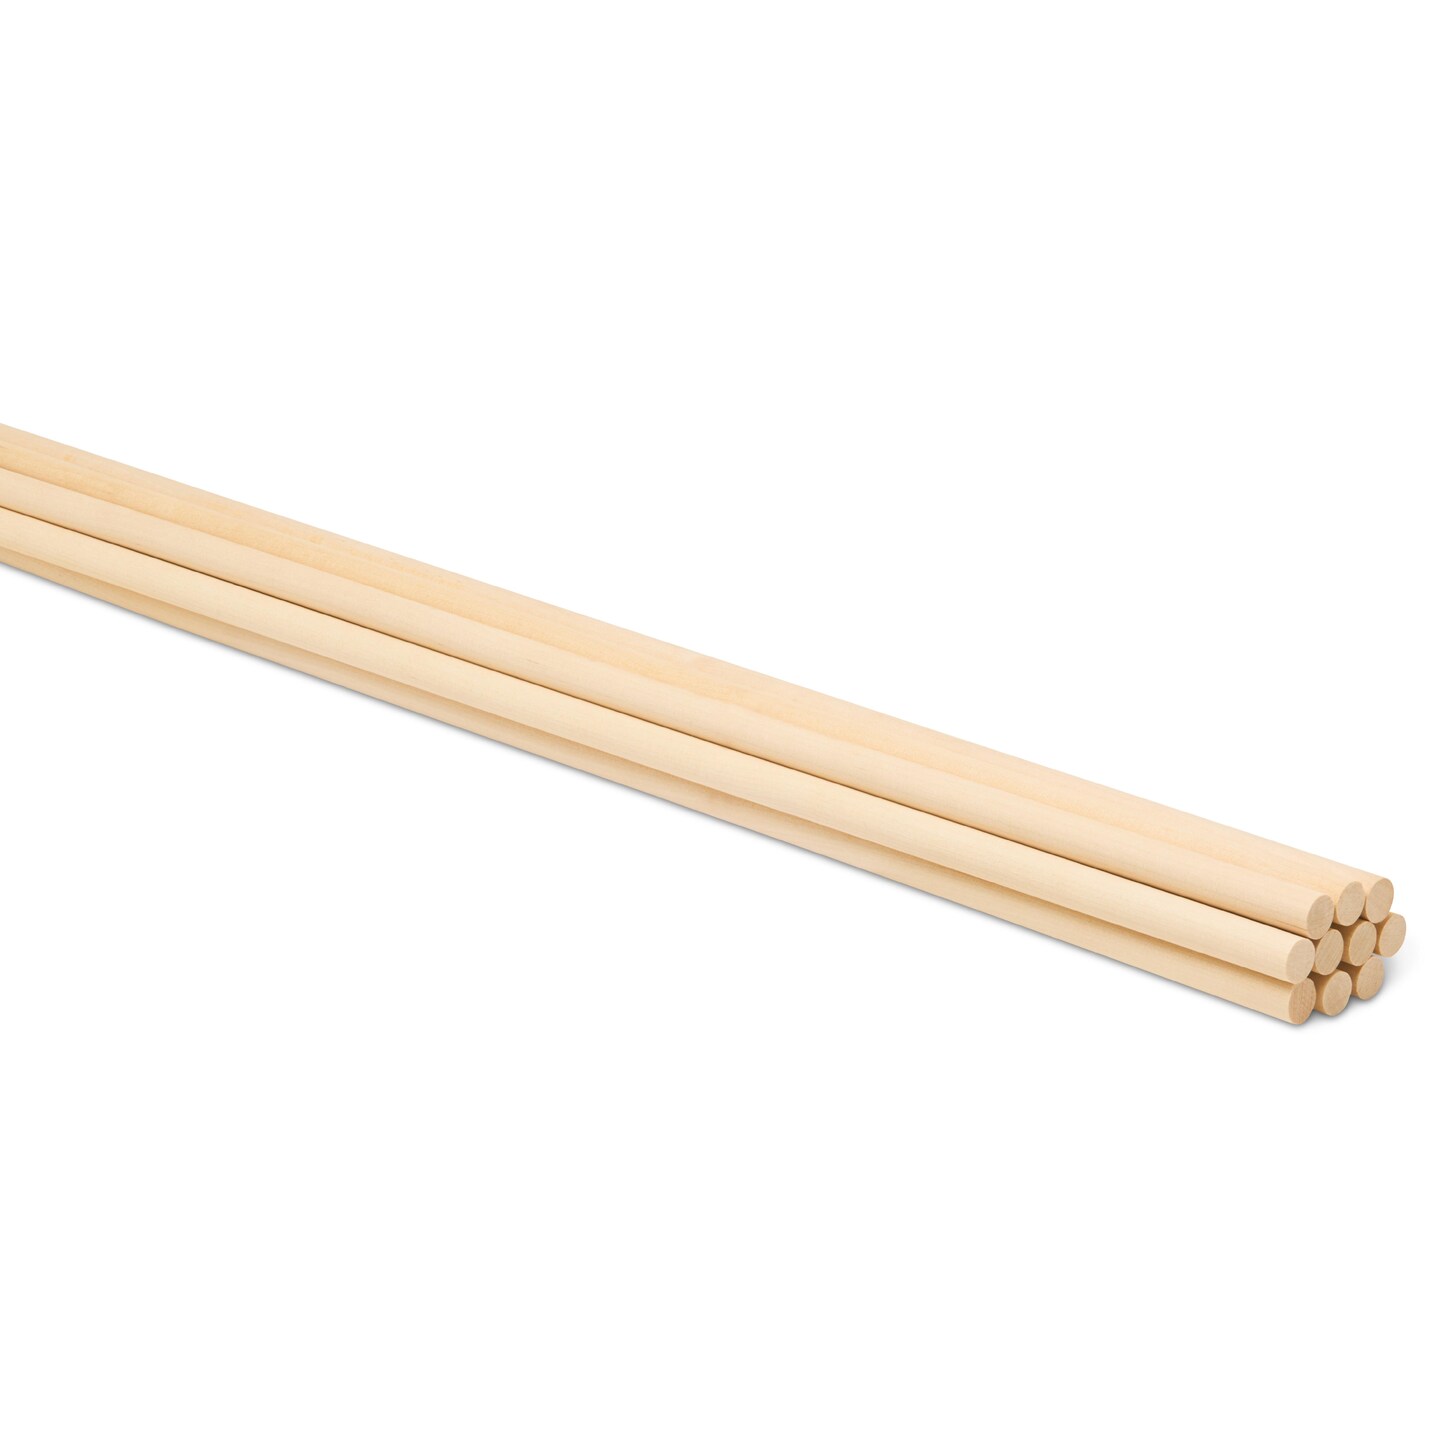 Wooden Dowel Rods 3/8 inch Thick, Multiple Lengths Available